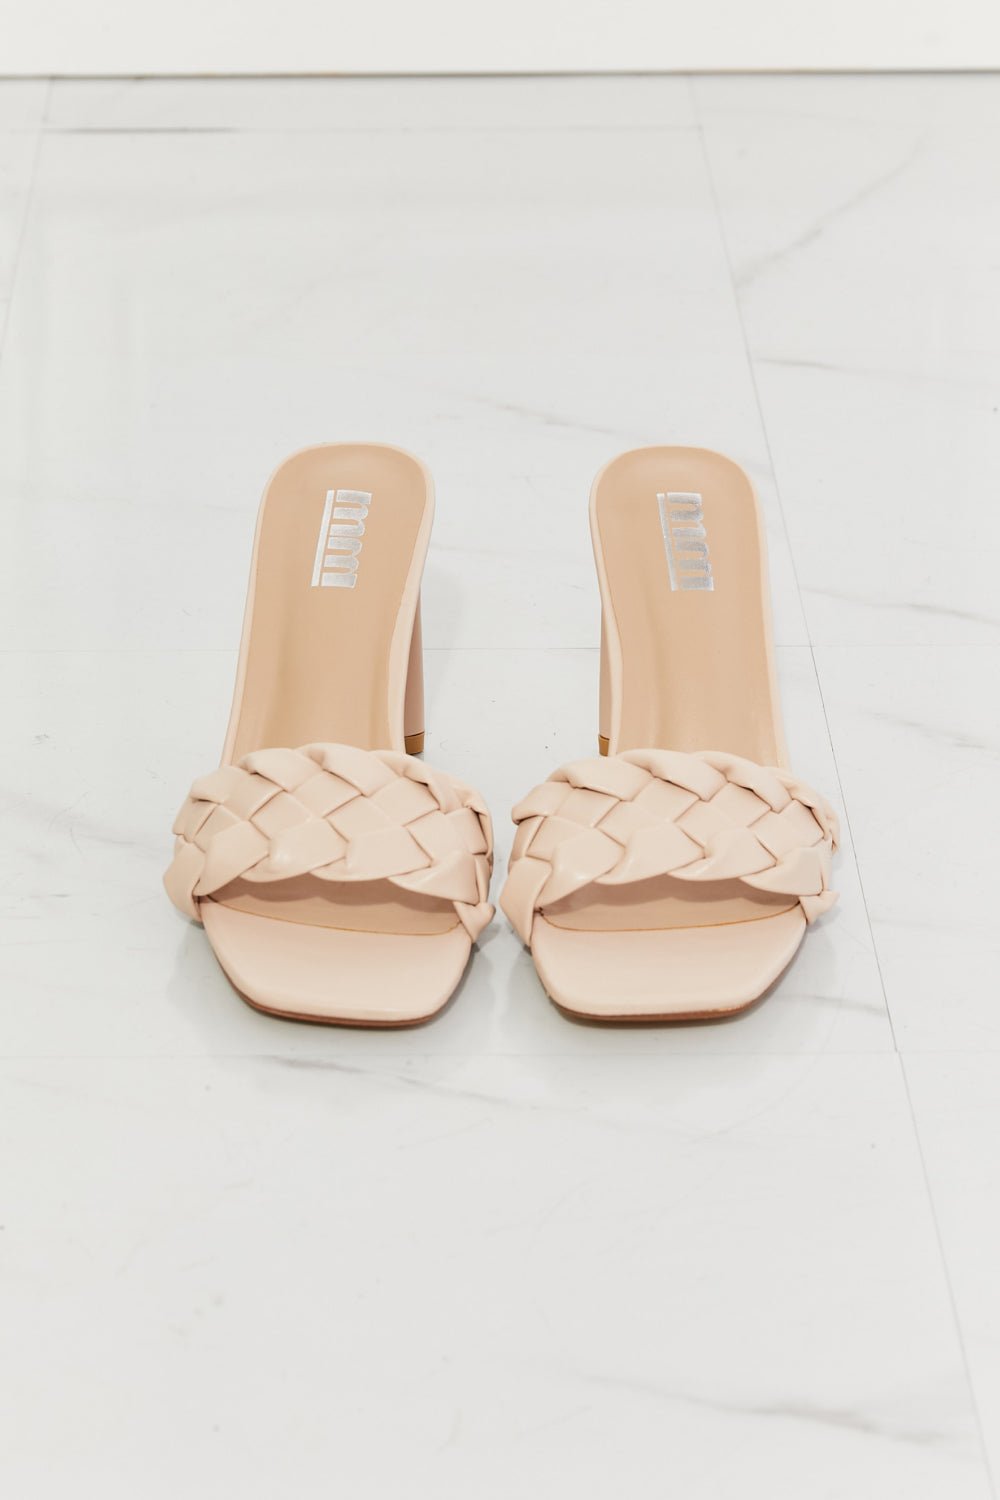 MMShoes Top of the World Braided Block Heel Sandals in Beige - OMG! Rose